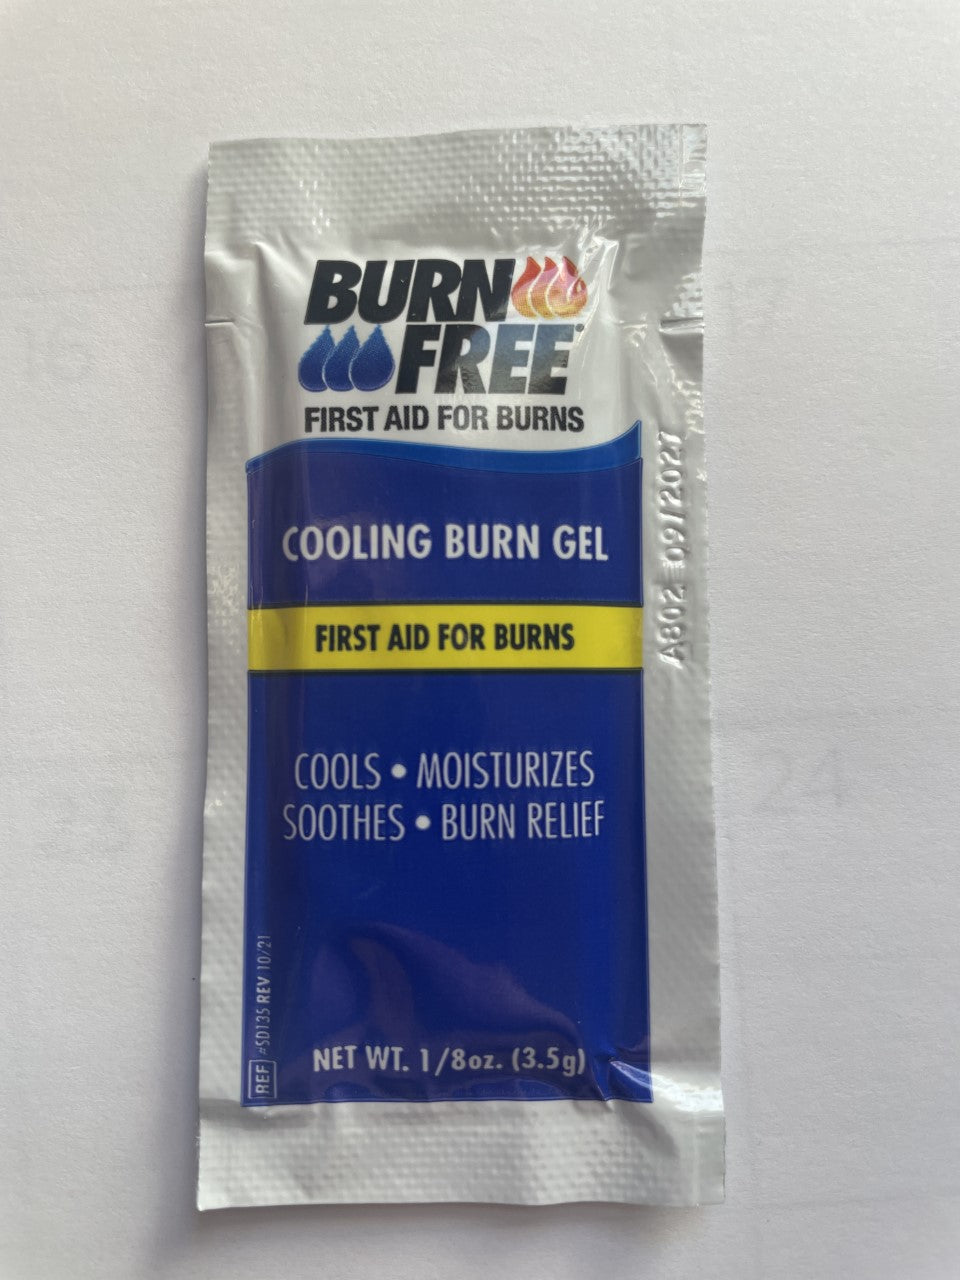 Burn Relief Jel:  packet